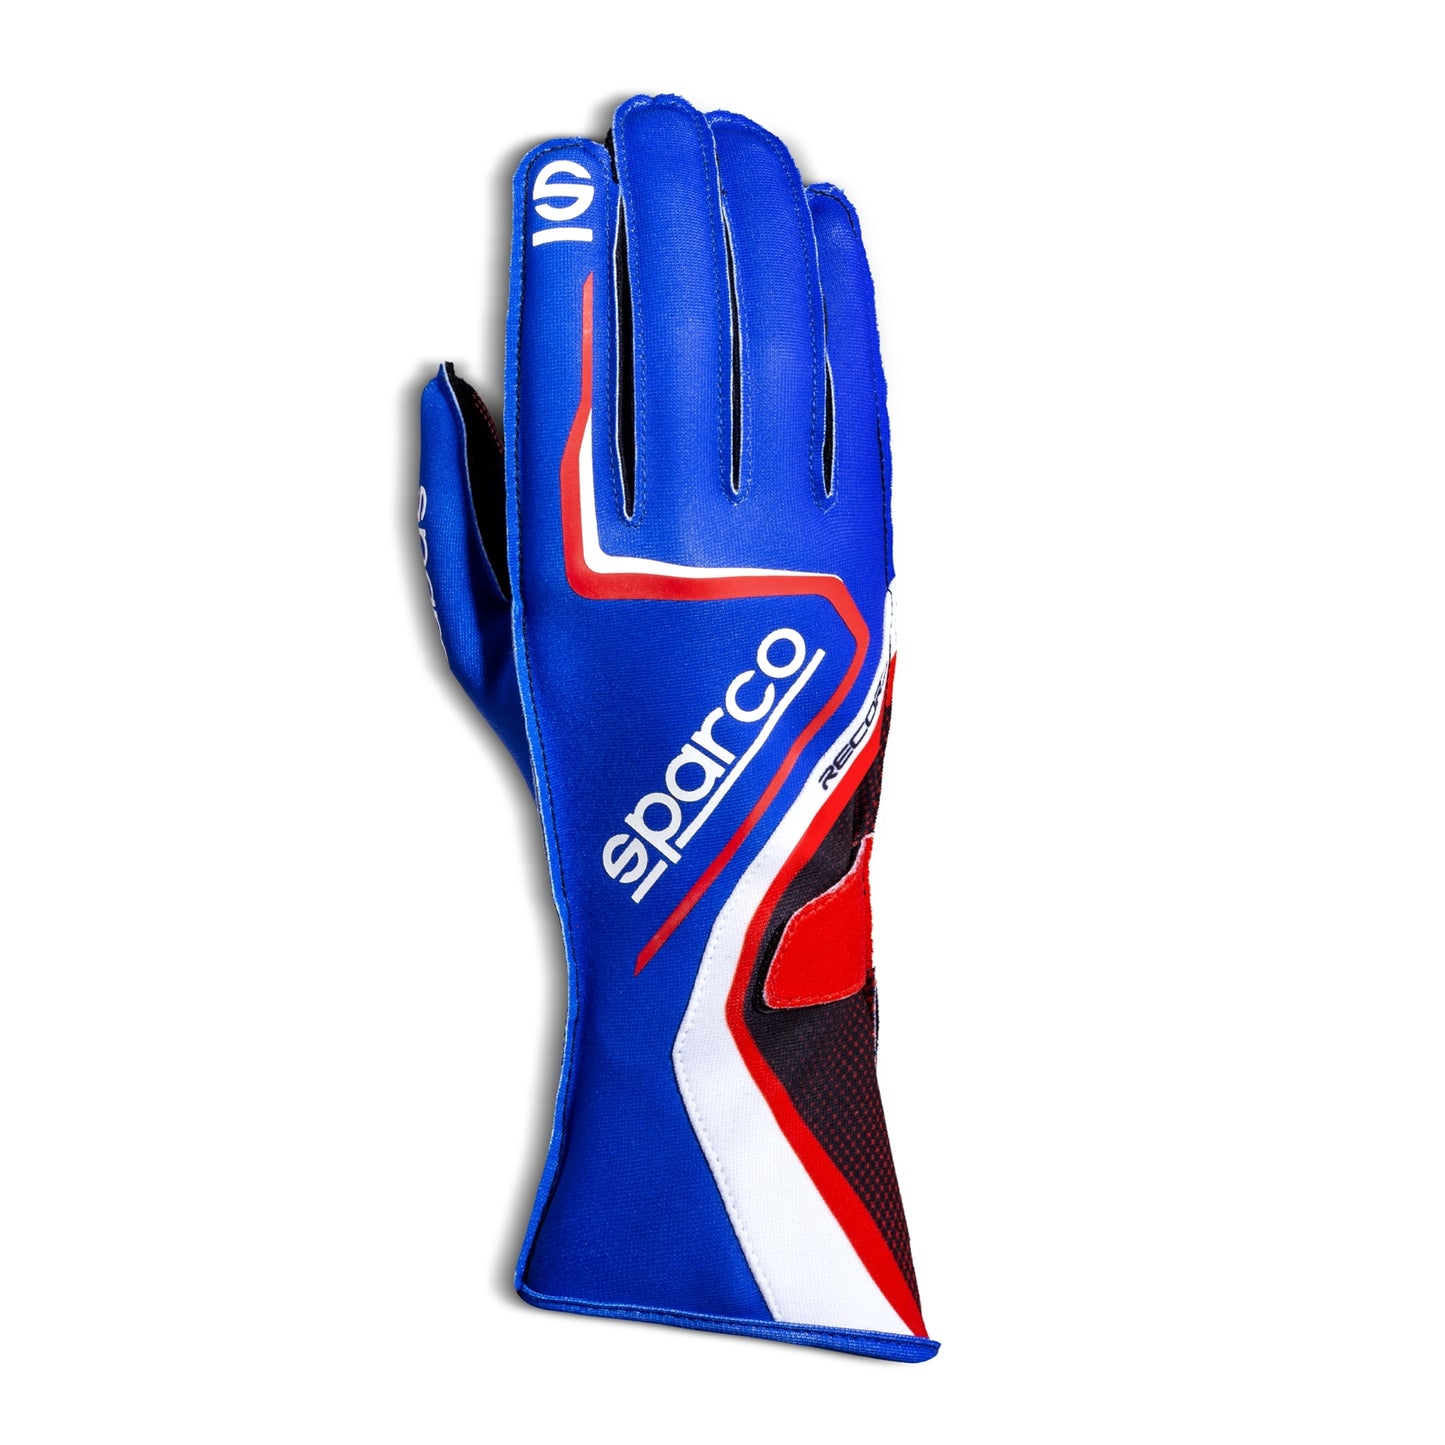 Sparco Record Karting Gloves